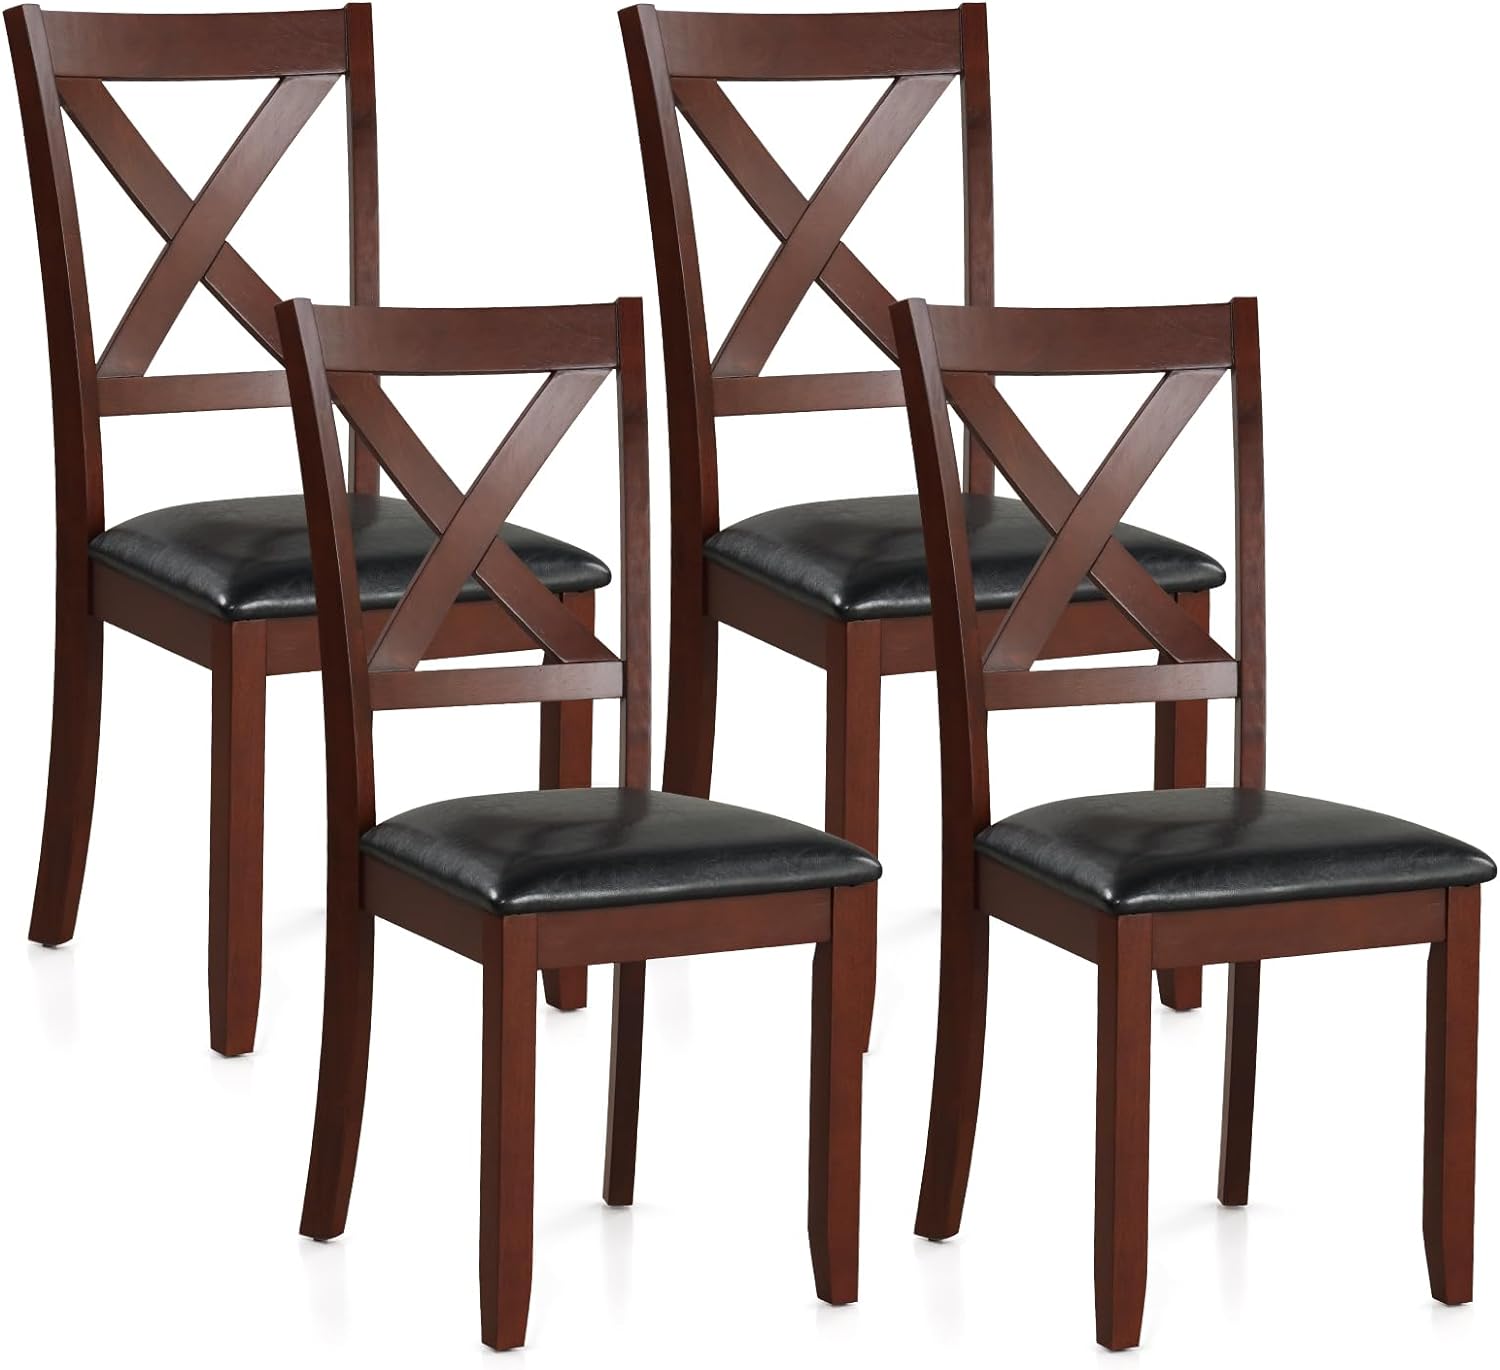 Giantex Wood Dining Chairs, Faux Leather Upholstered Dining Chairs with Rubber Wood Legs